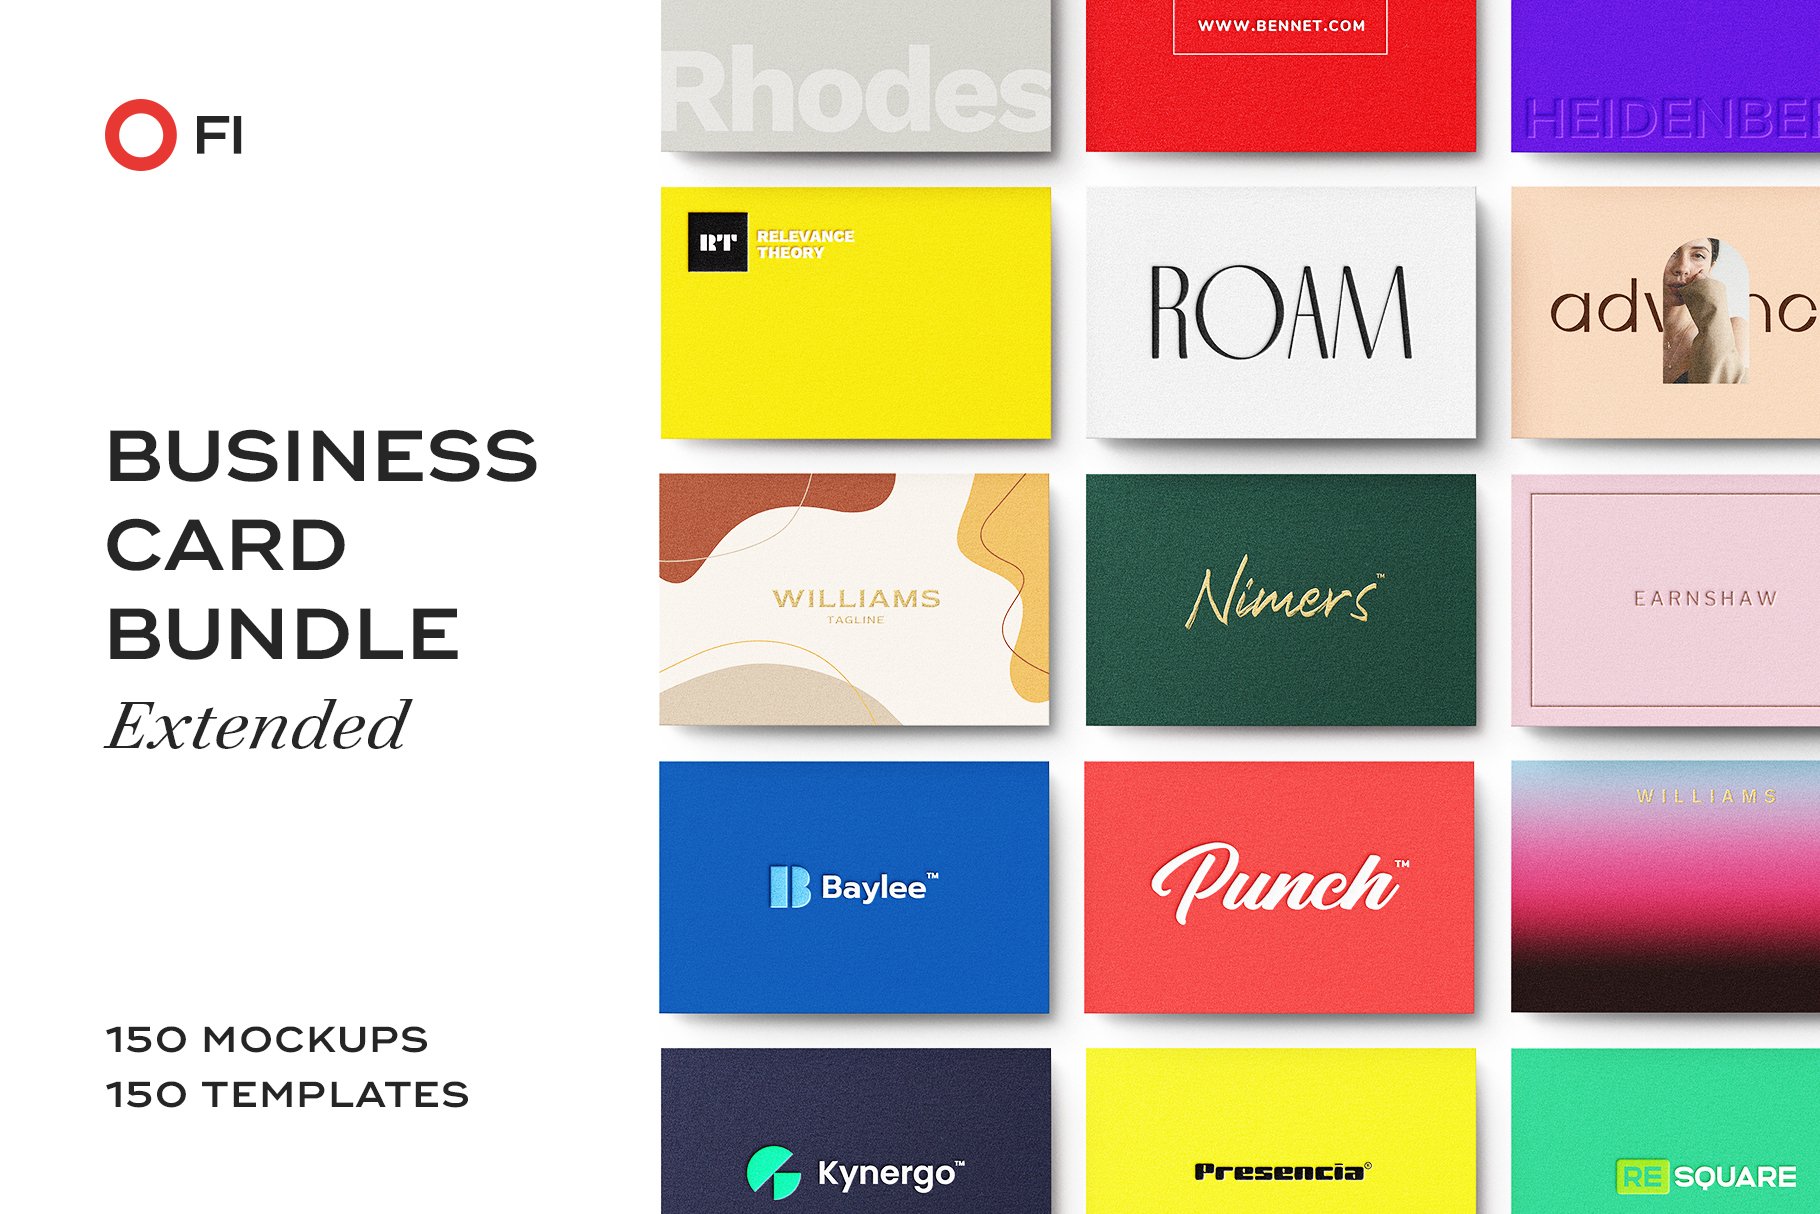 Business Card Logo Template Bundle cover image.